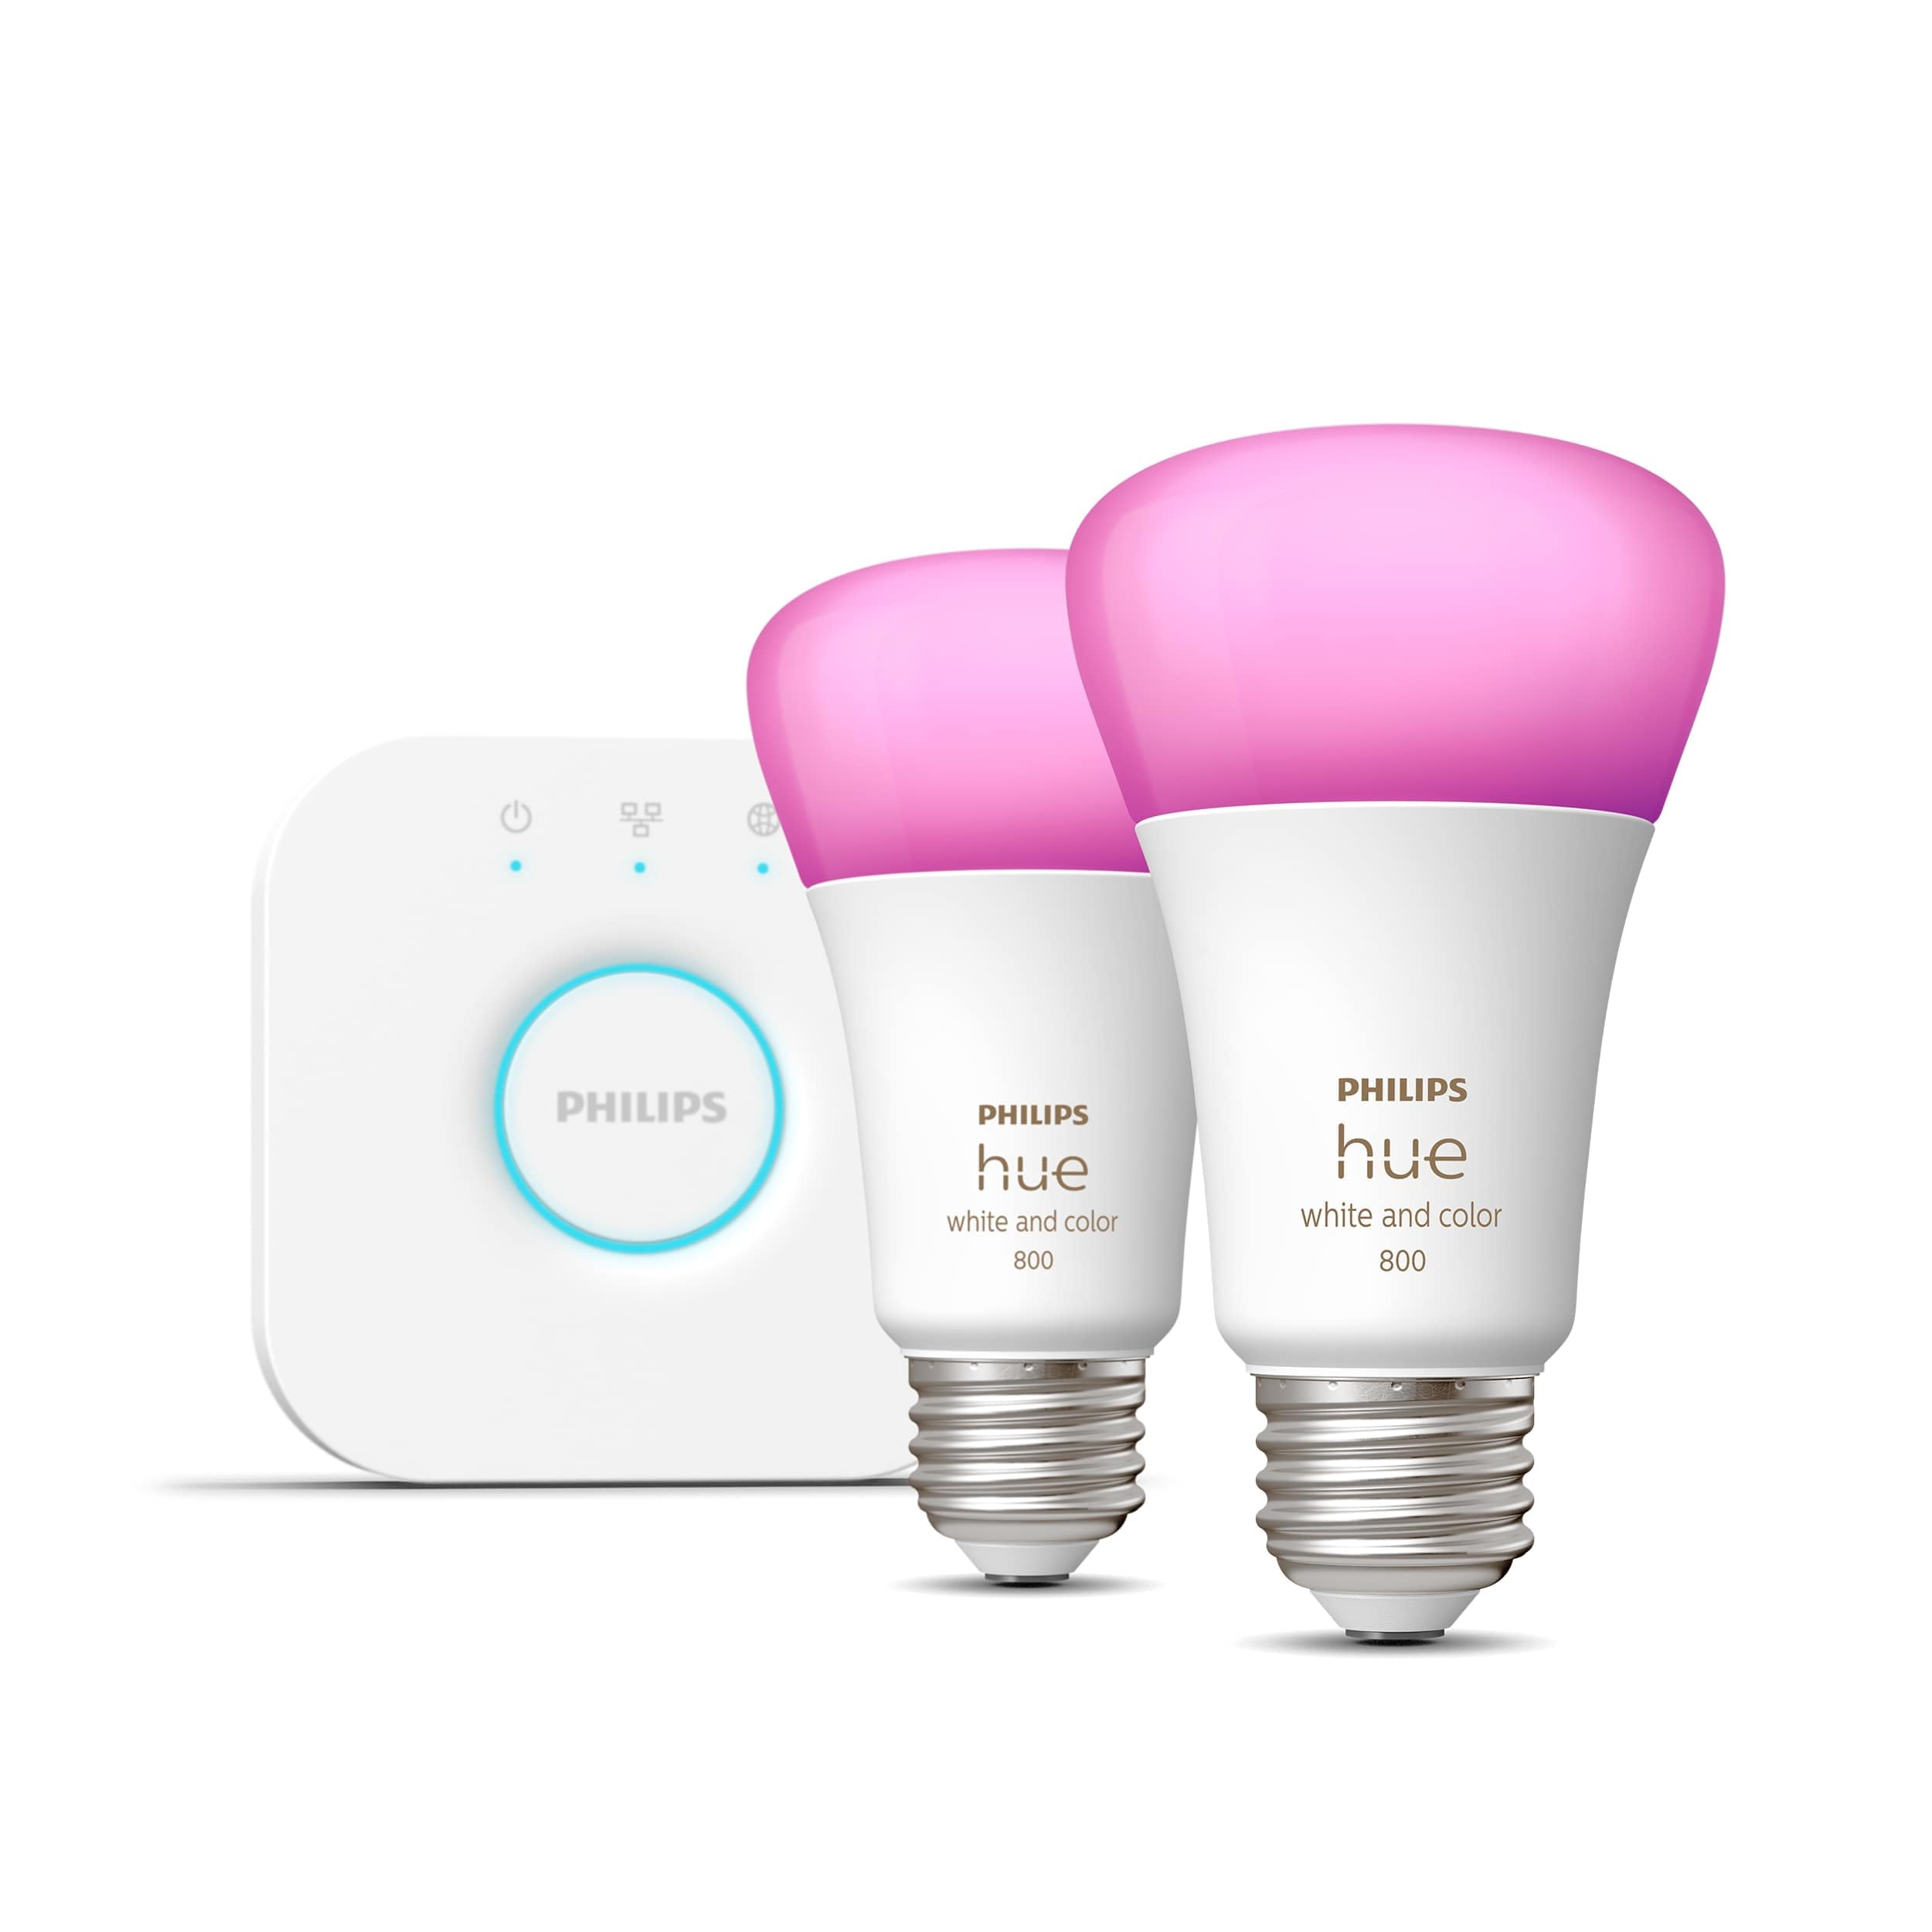 Philips Hue White and Color Ambiance Smart Light Starter Kit, Includes (2) 60W A19 Smart Bulbs with Hue Bridge, Compatible with Alexa, Apple HomeKit and Google Assistant